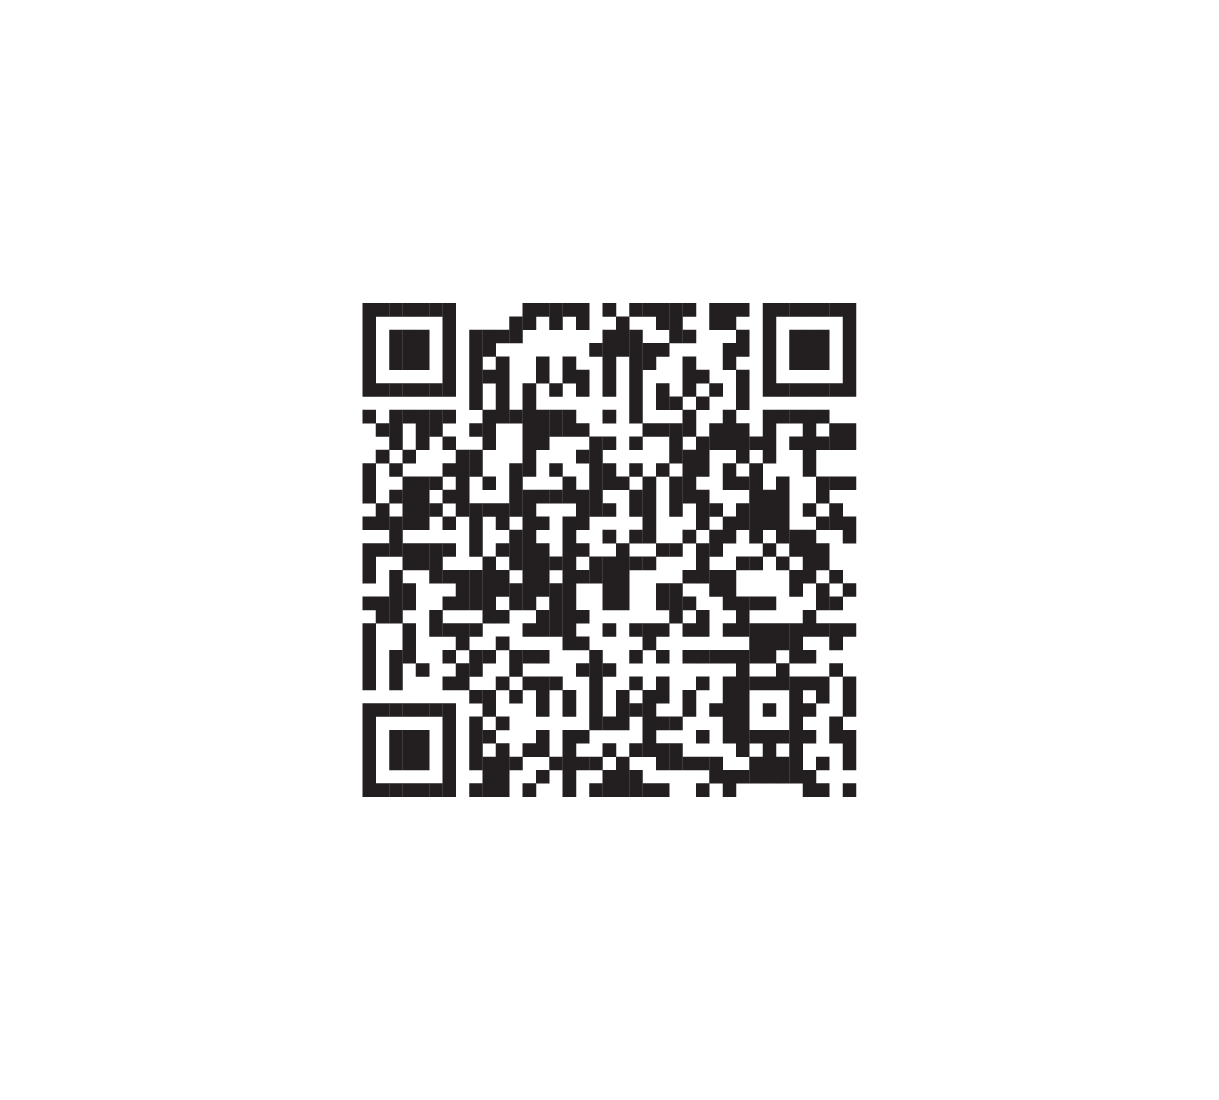 general/qrcode-01.png